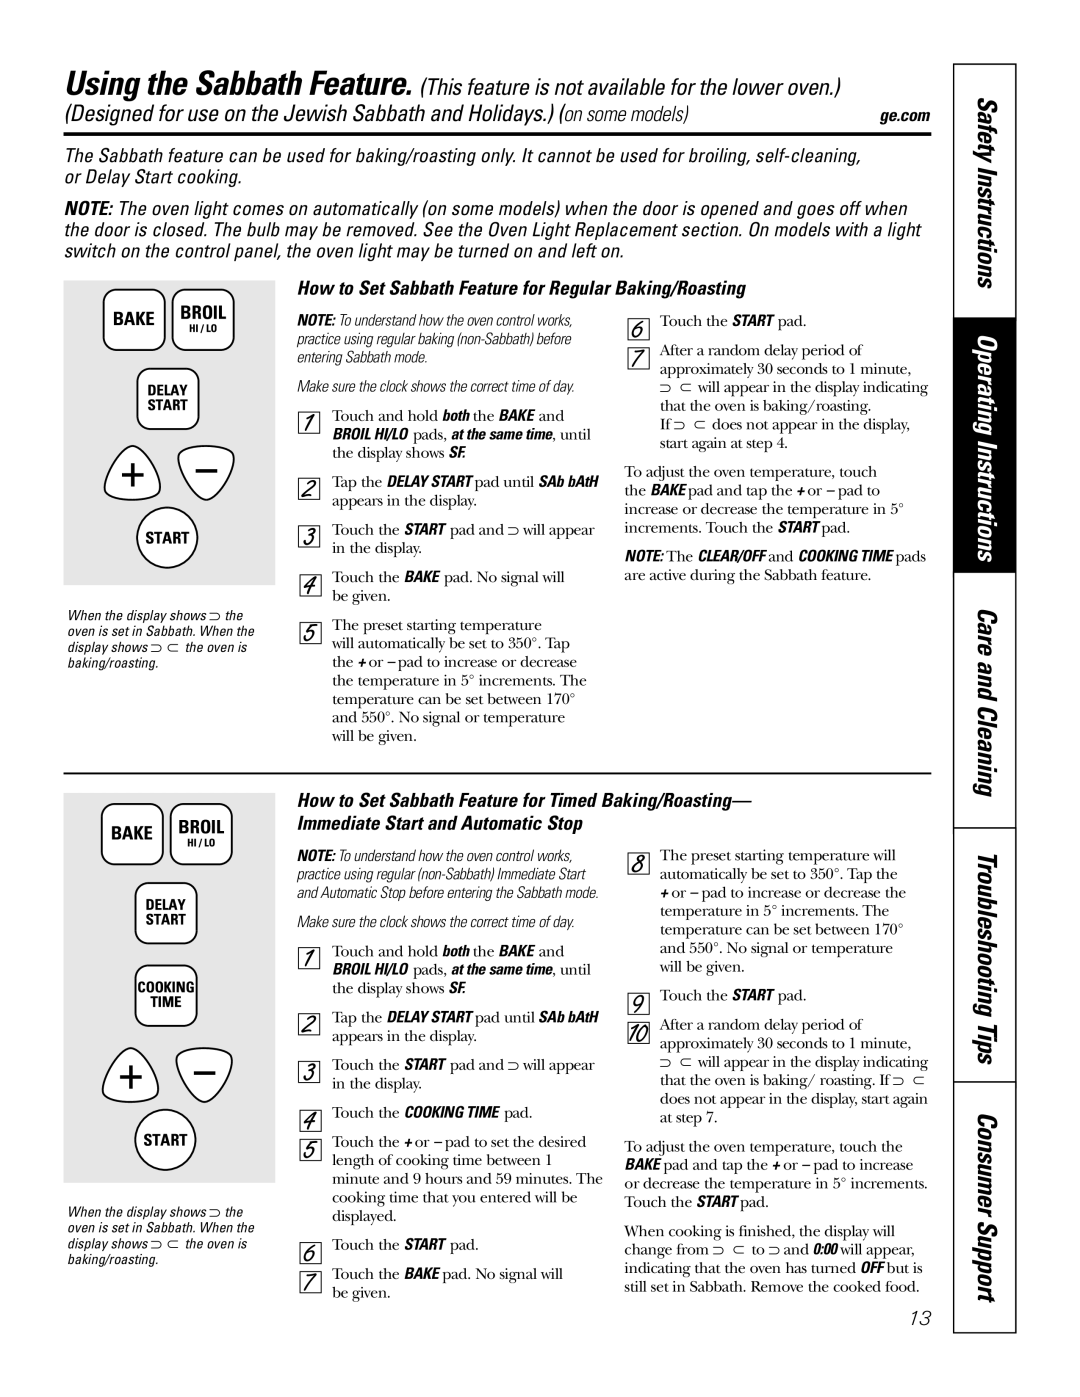 GE JRP28 owner manual Safety Instructions, Designed for use on the Jewish Sabbath and Holidays. on some models 